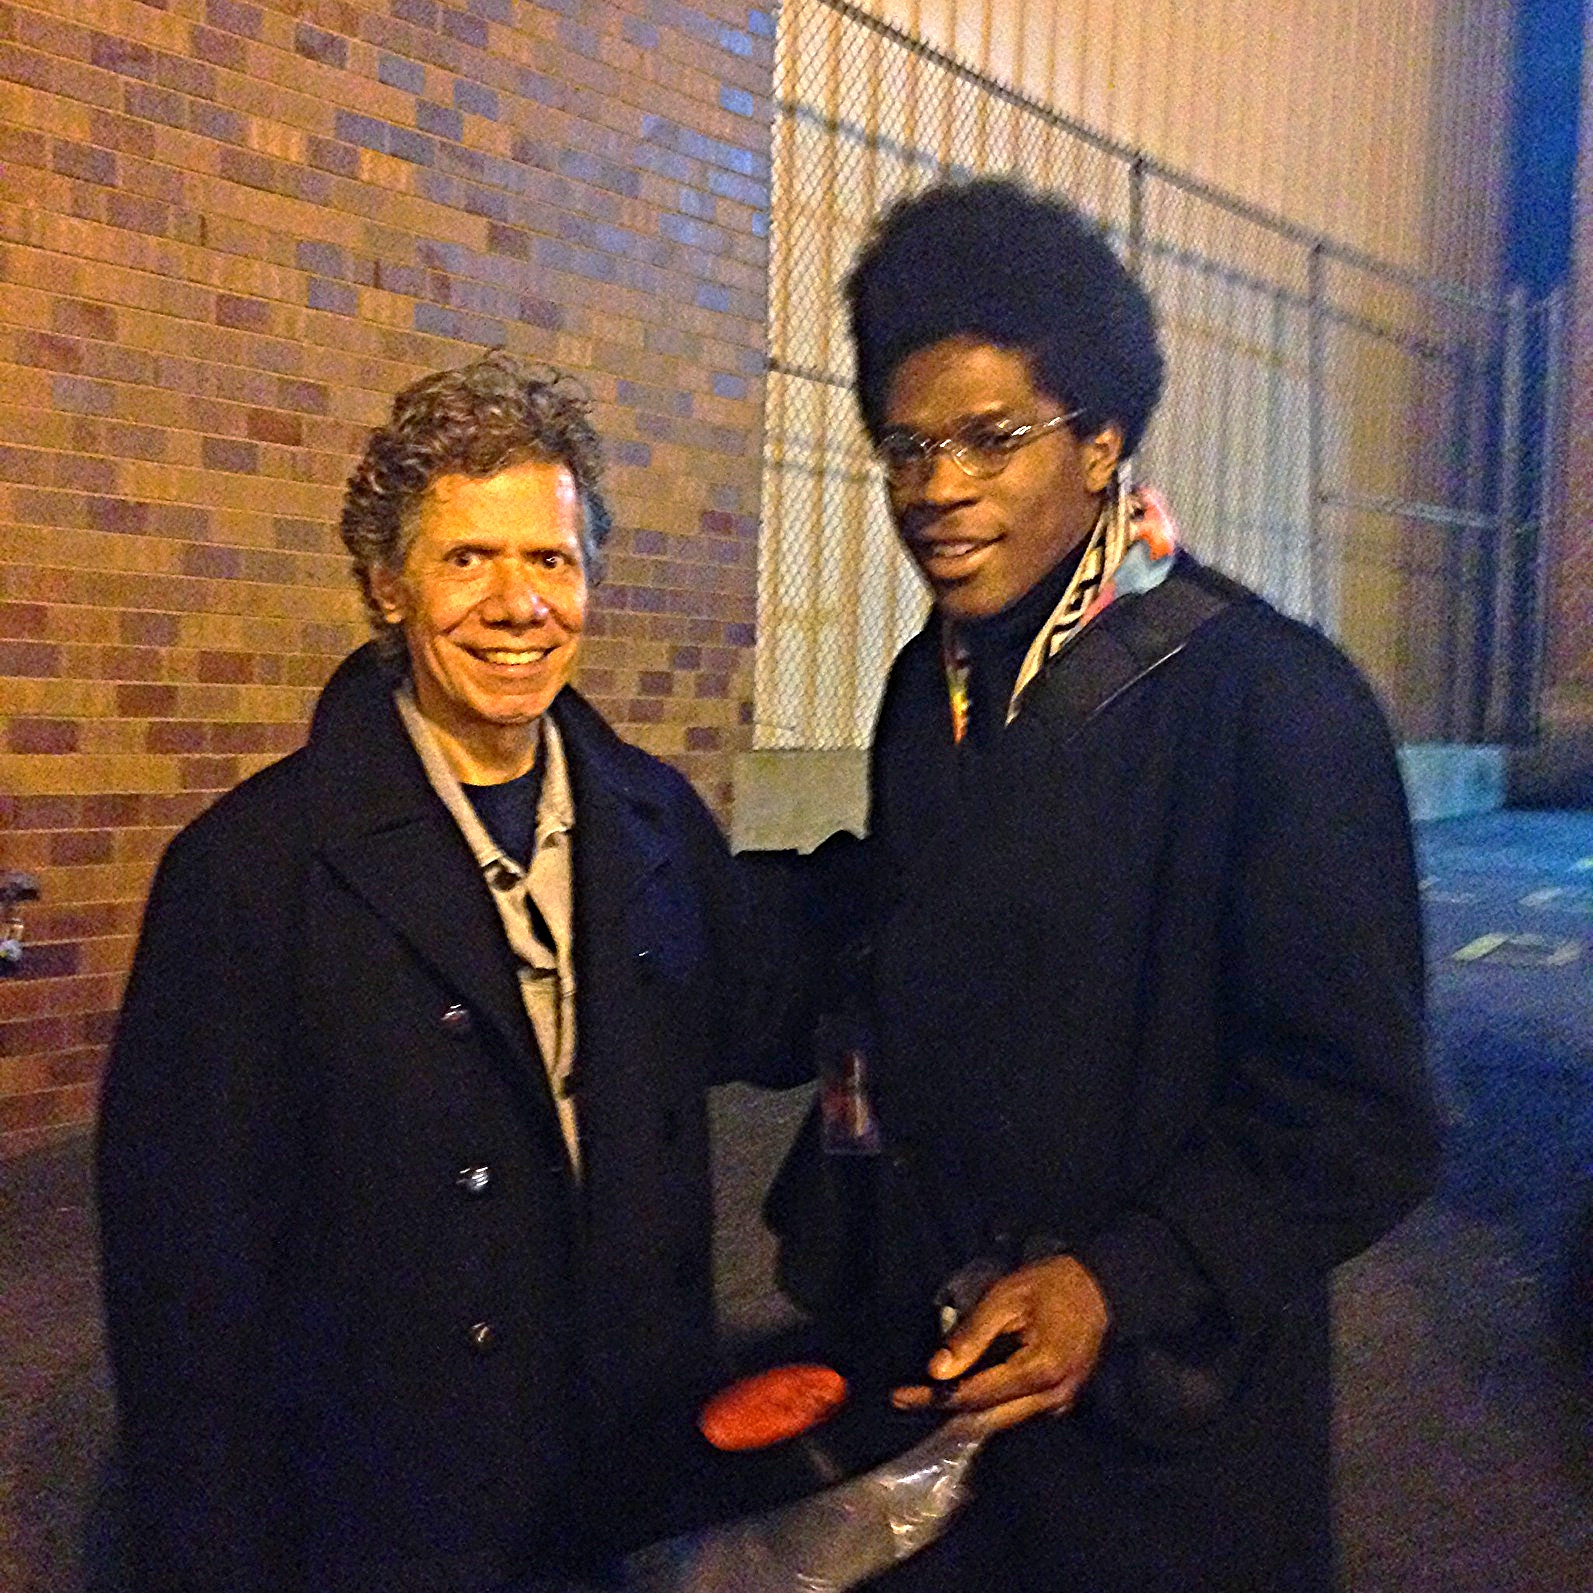 Chick Corea signing his album "Friends" for me after his solo piano performance.